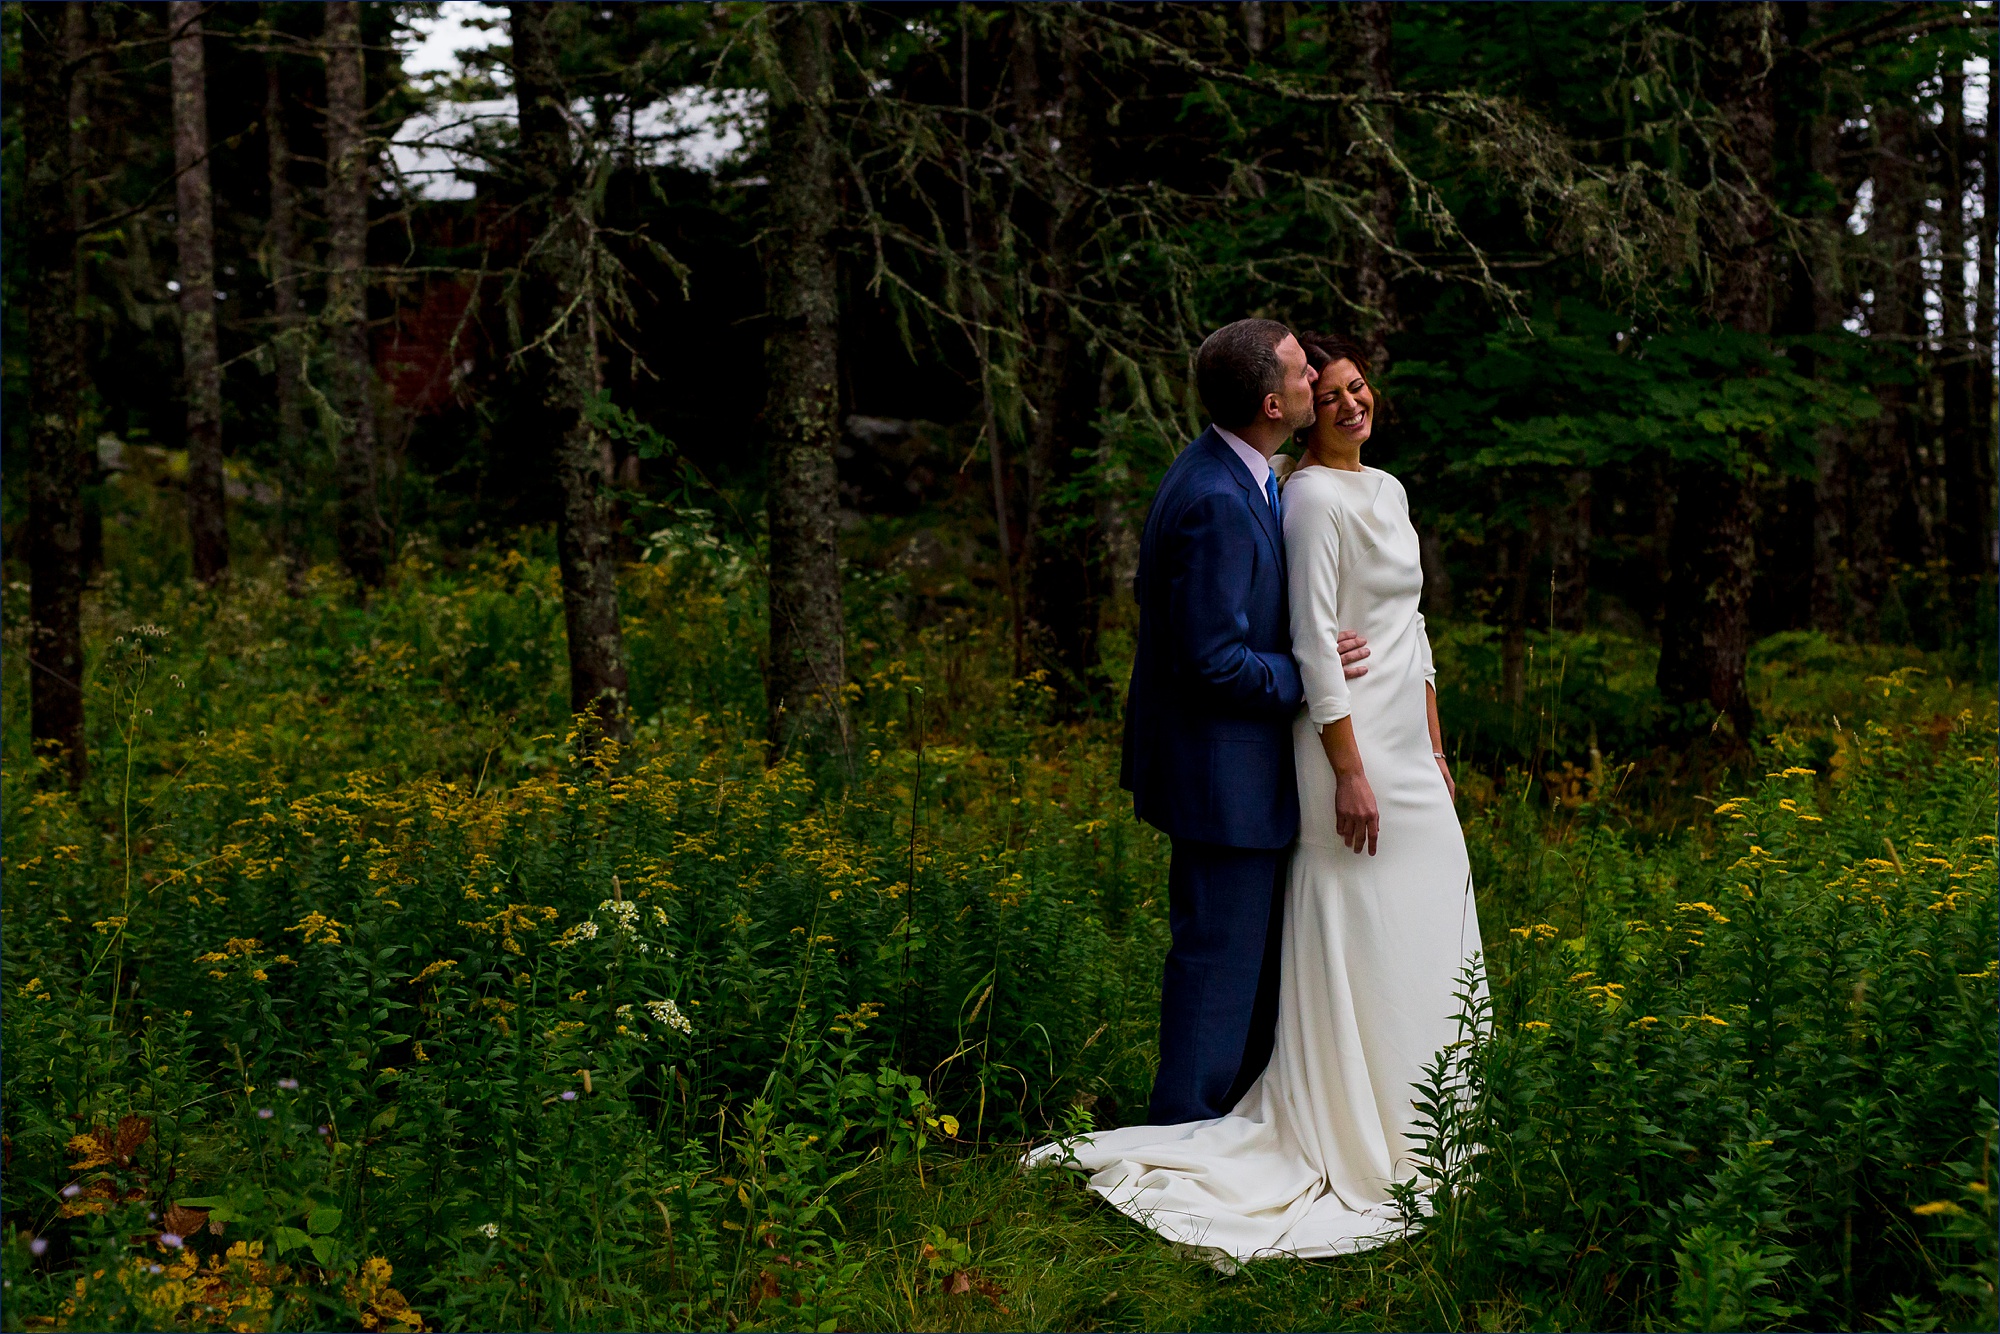 The bride and groom hold each other close before the rain starts on Little Cranberry Island Maine for their wedding